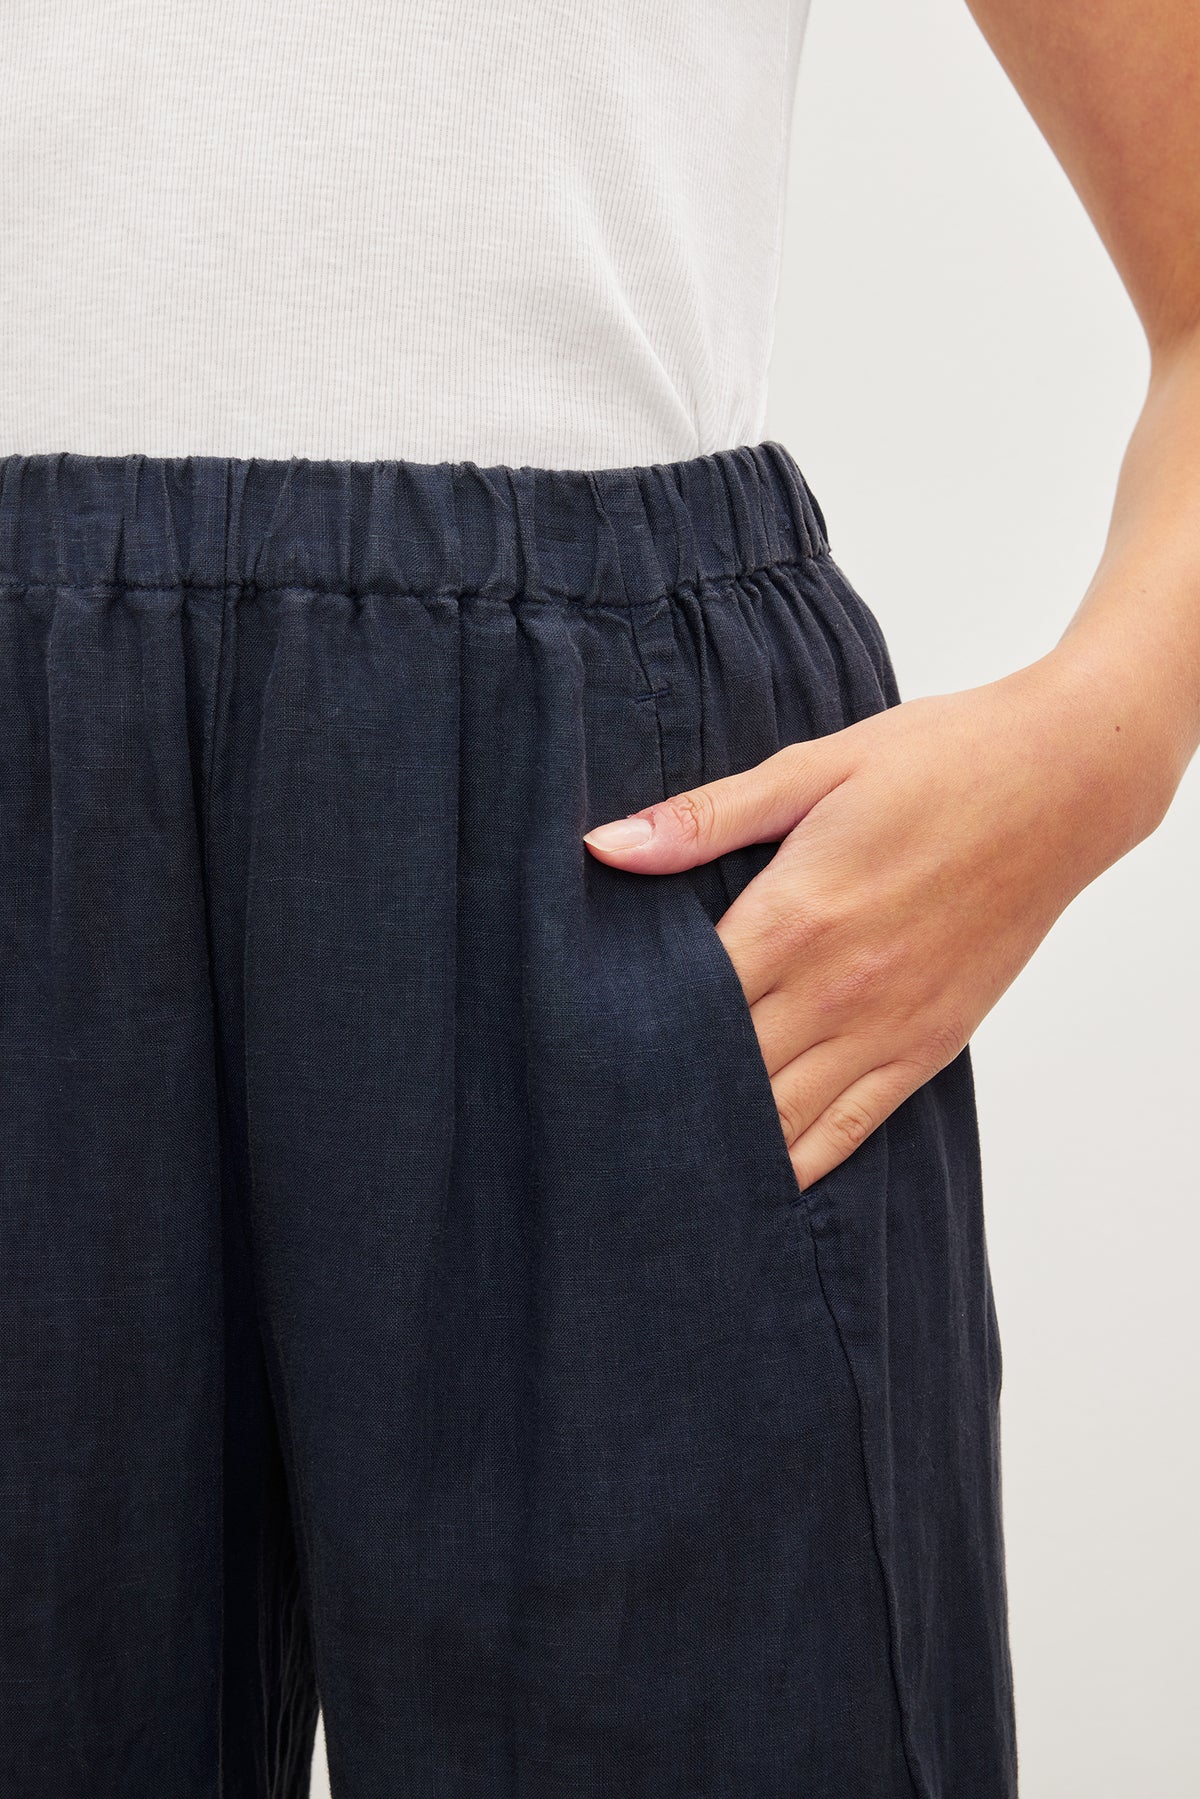 Close-up of a person's hand tucking into the pocket of dark blue Velvet by Graham & Spencer LOLA LINEN PANT.-36581077483713